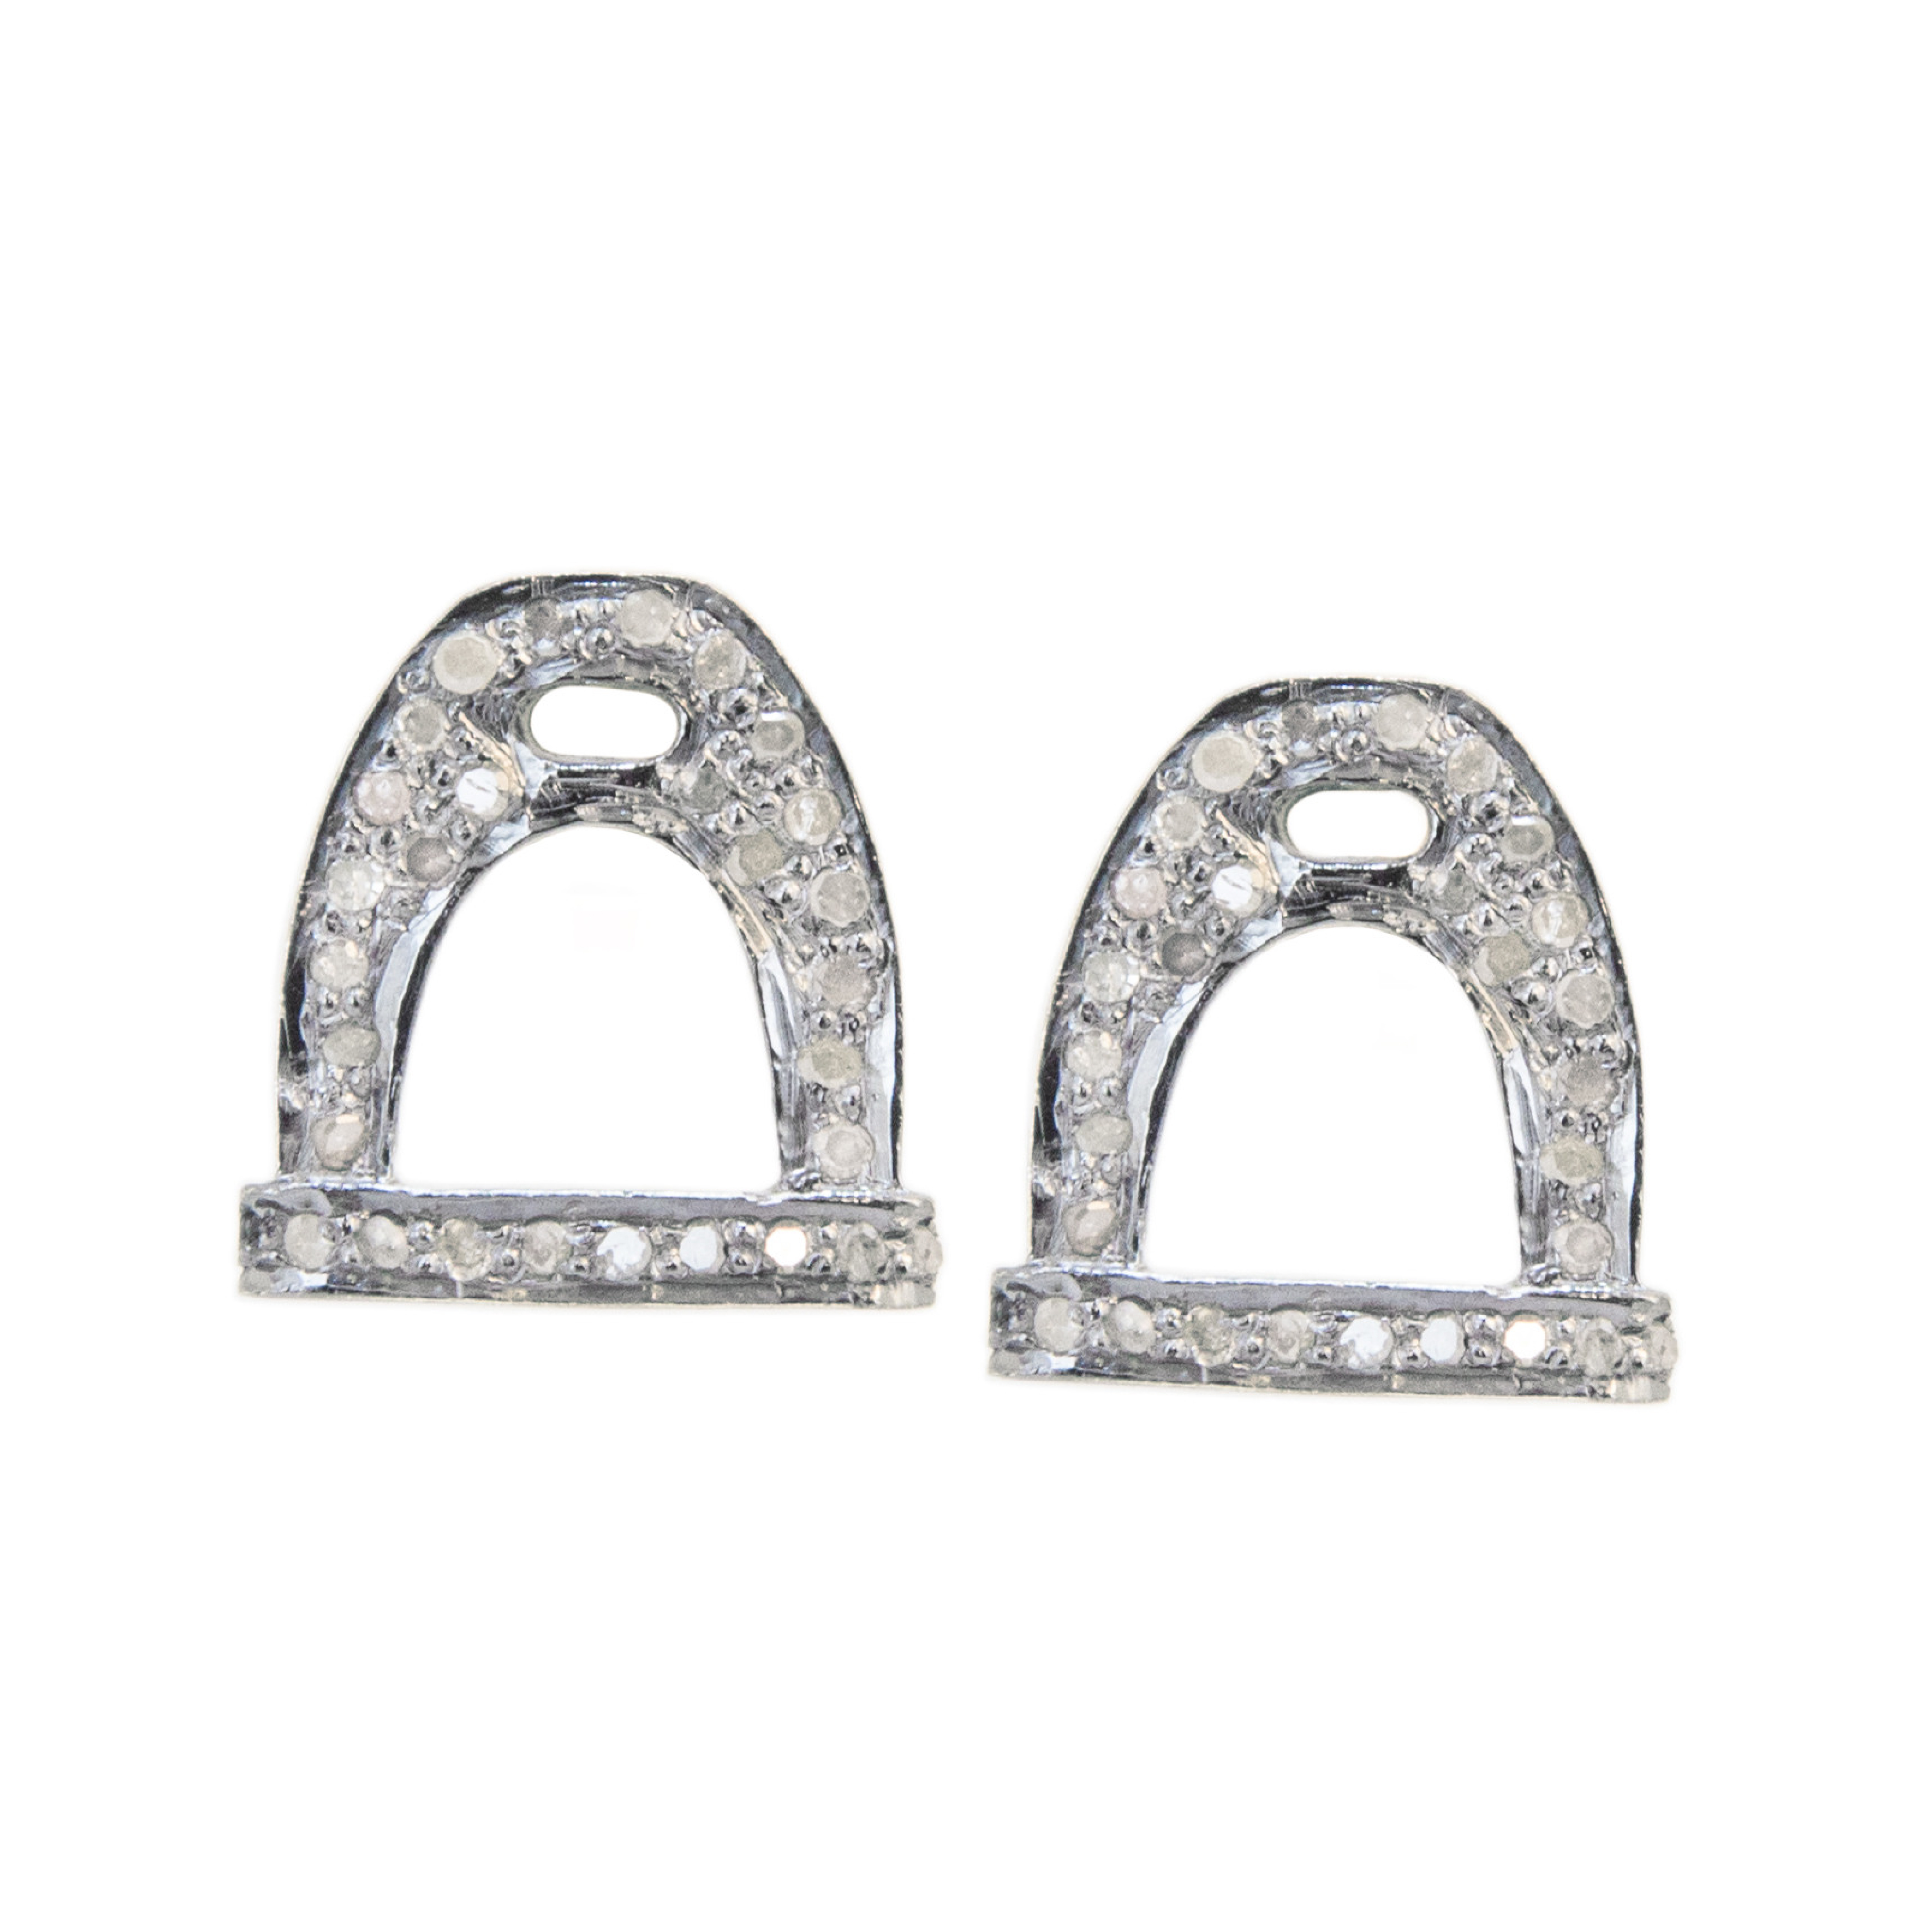 VINCENT PEACH STERLING SILVER "DEMURE" STIRRUP STUD EARRINGS WITH PAVE SET DIAMONDS WITH 14K YELLOW GOLD POSTS AND BACKS